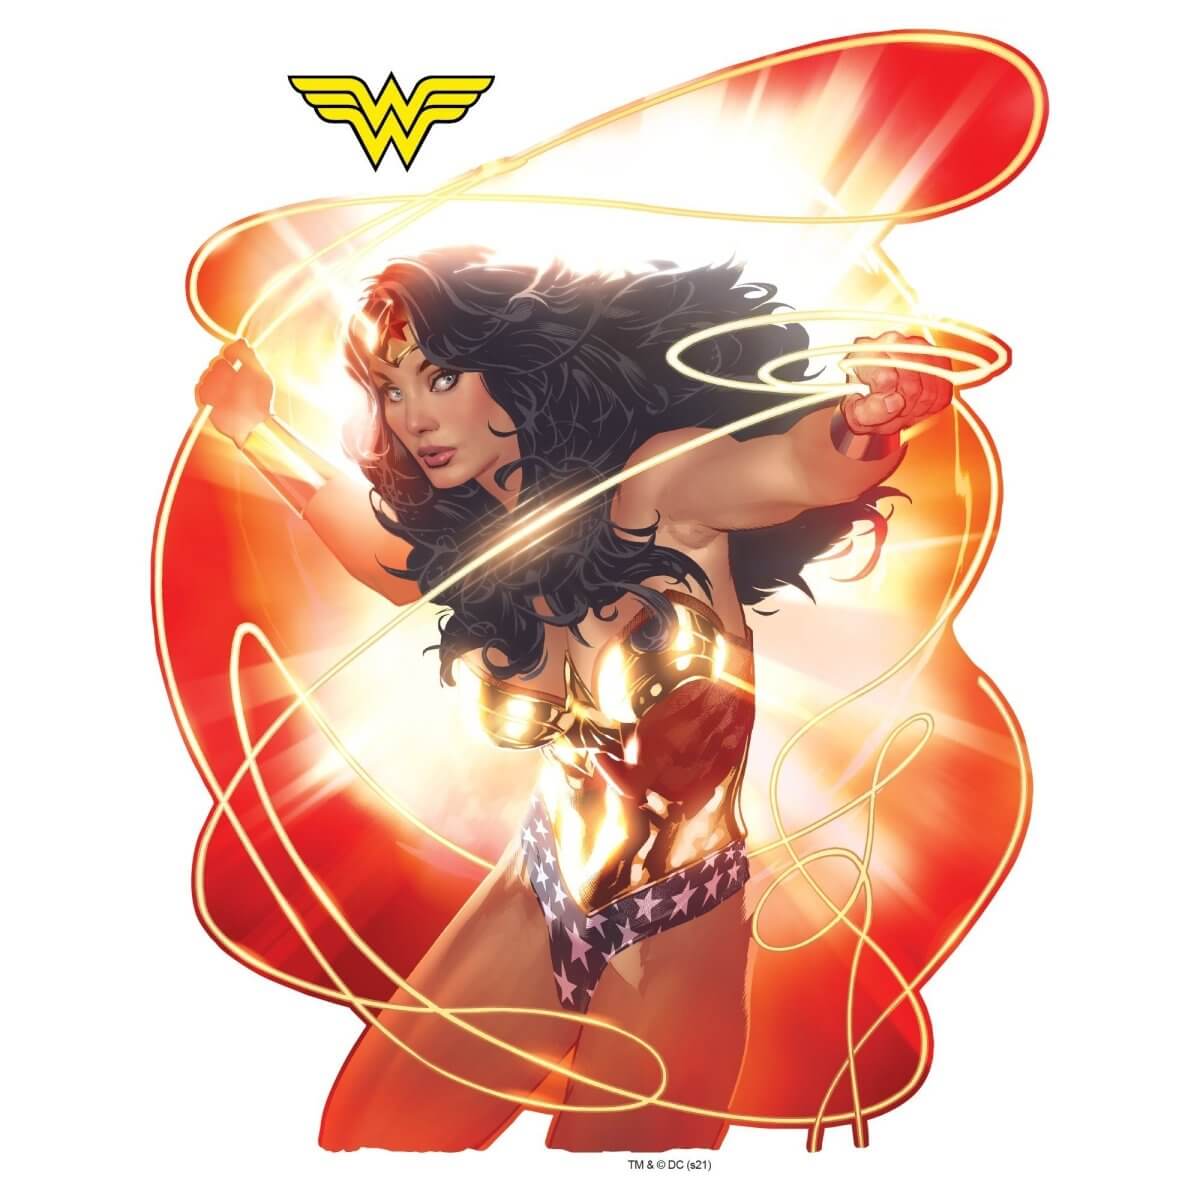 Kismet Decals Wonder Woman Encyclopedia Comic Cover Series Officially Licensed Wall Sticker - Easy DIY DC Comics Home, Kids or Adult Bedroom, Office, Living Room Decor Wall Art - Kismet Decals